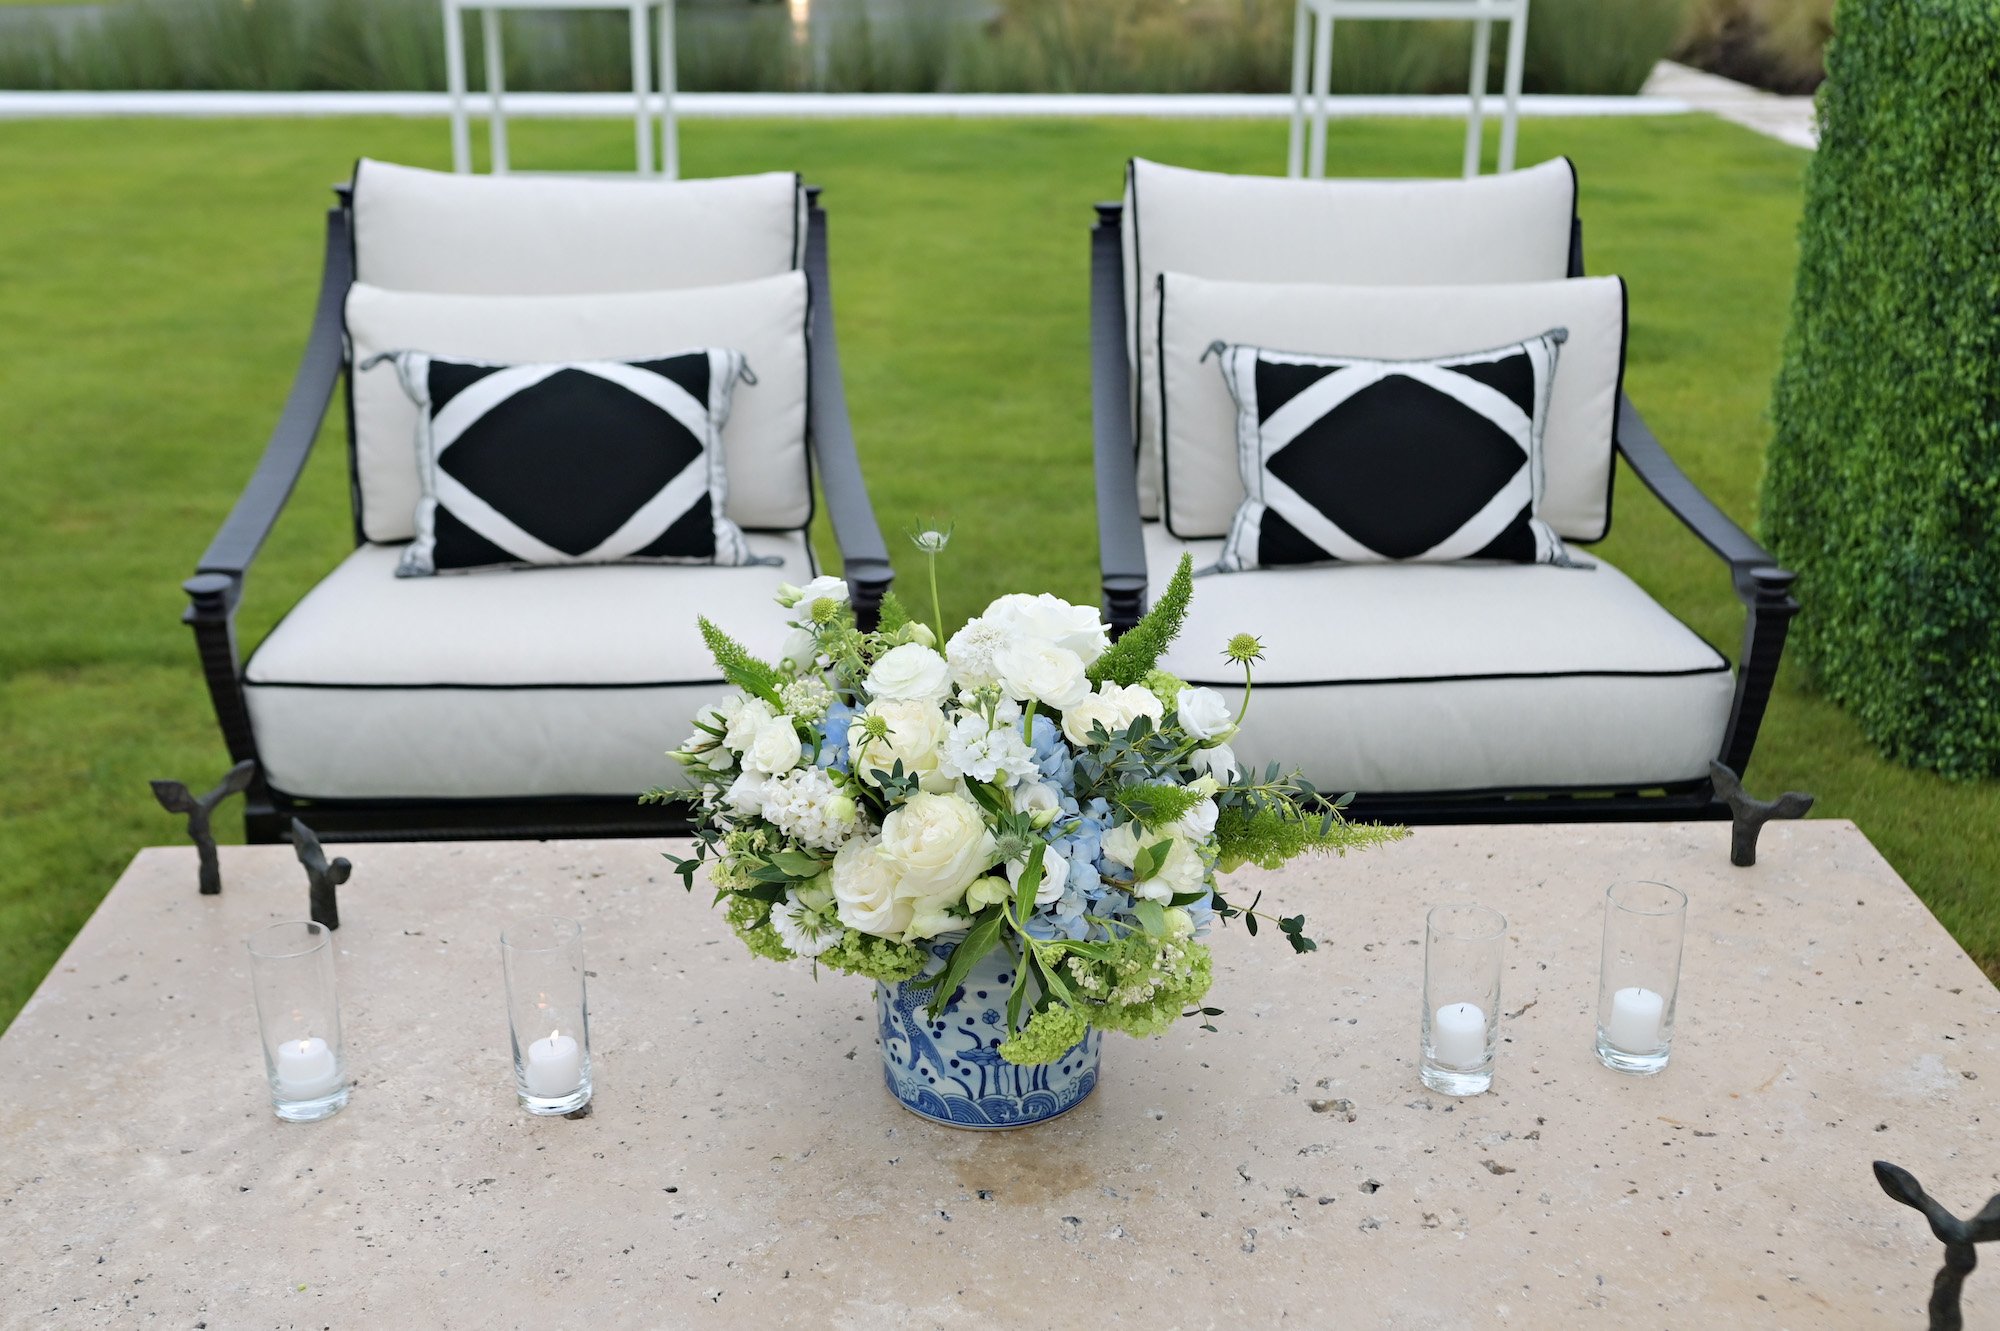 Elegant Tented Wedding Rehearsal Dinner At Home Outdoor Seating